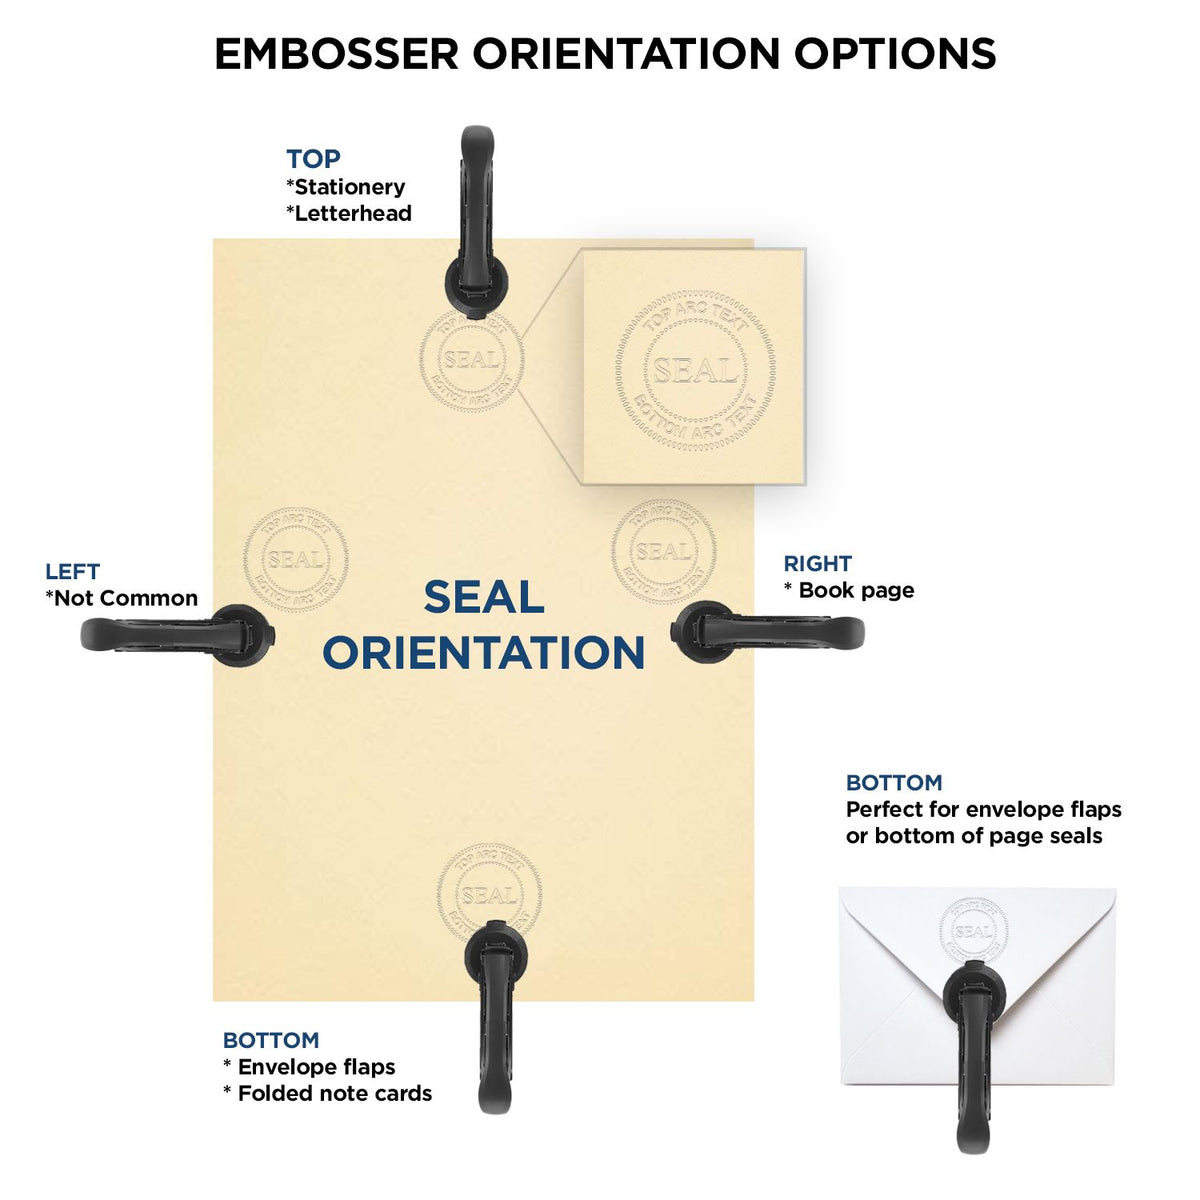 An infographic for the Long Reach Colorado Land Surveyor Seal showing embosser orientation, this is showing examples of a top, bottom, right and left insert.